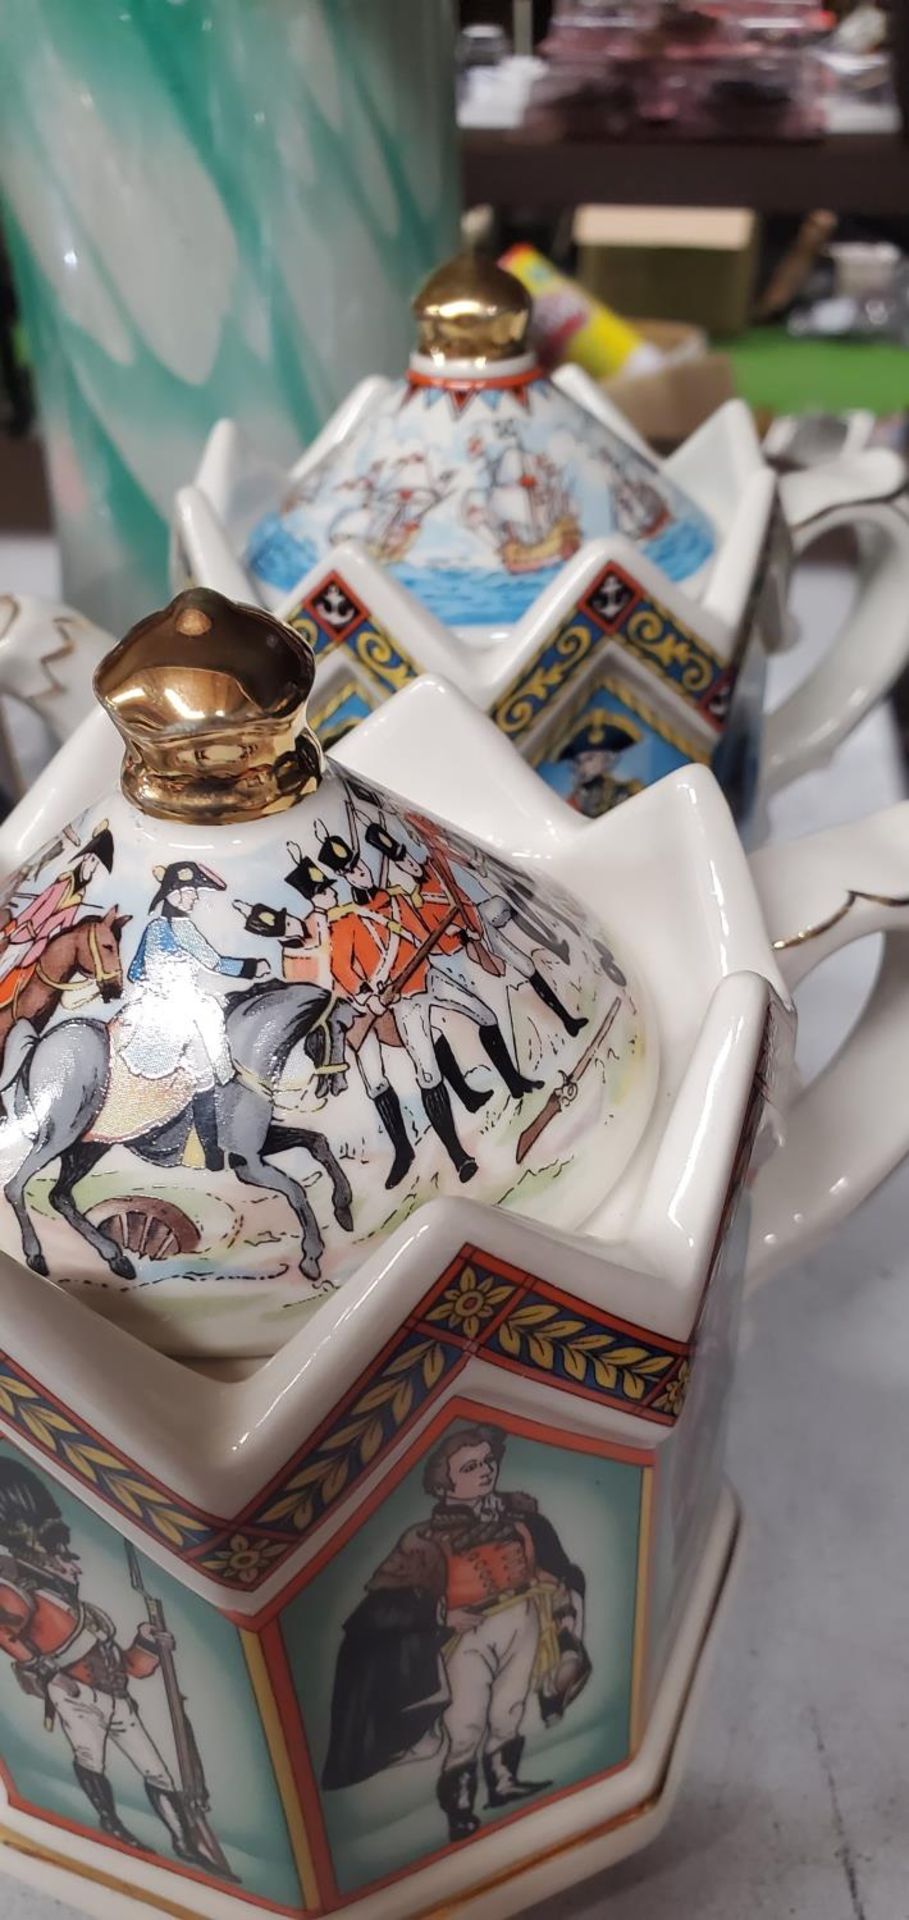 FOUR SADLER TEAPOTS TO INCLUDE ELIZABETH 1, THE DUKE OF WELLINGTON, KING HENRY VIII AND LORD - Image 3 of 3